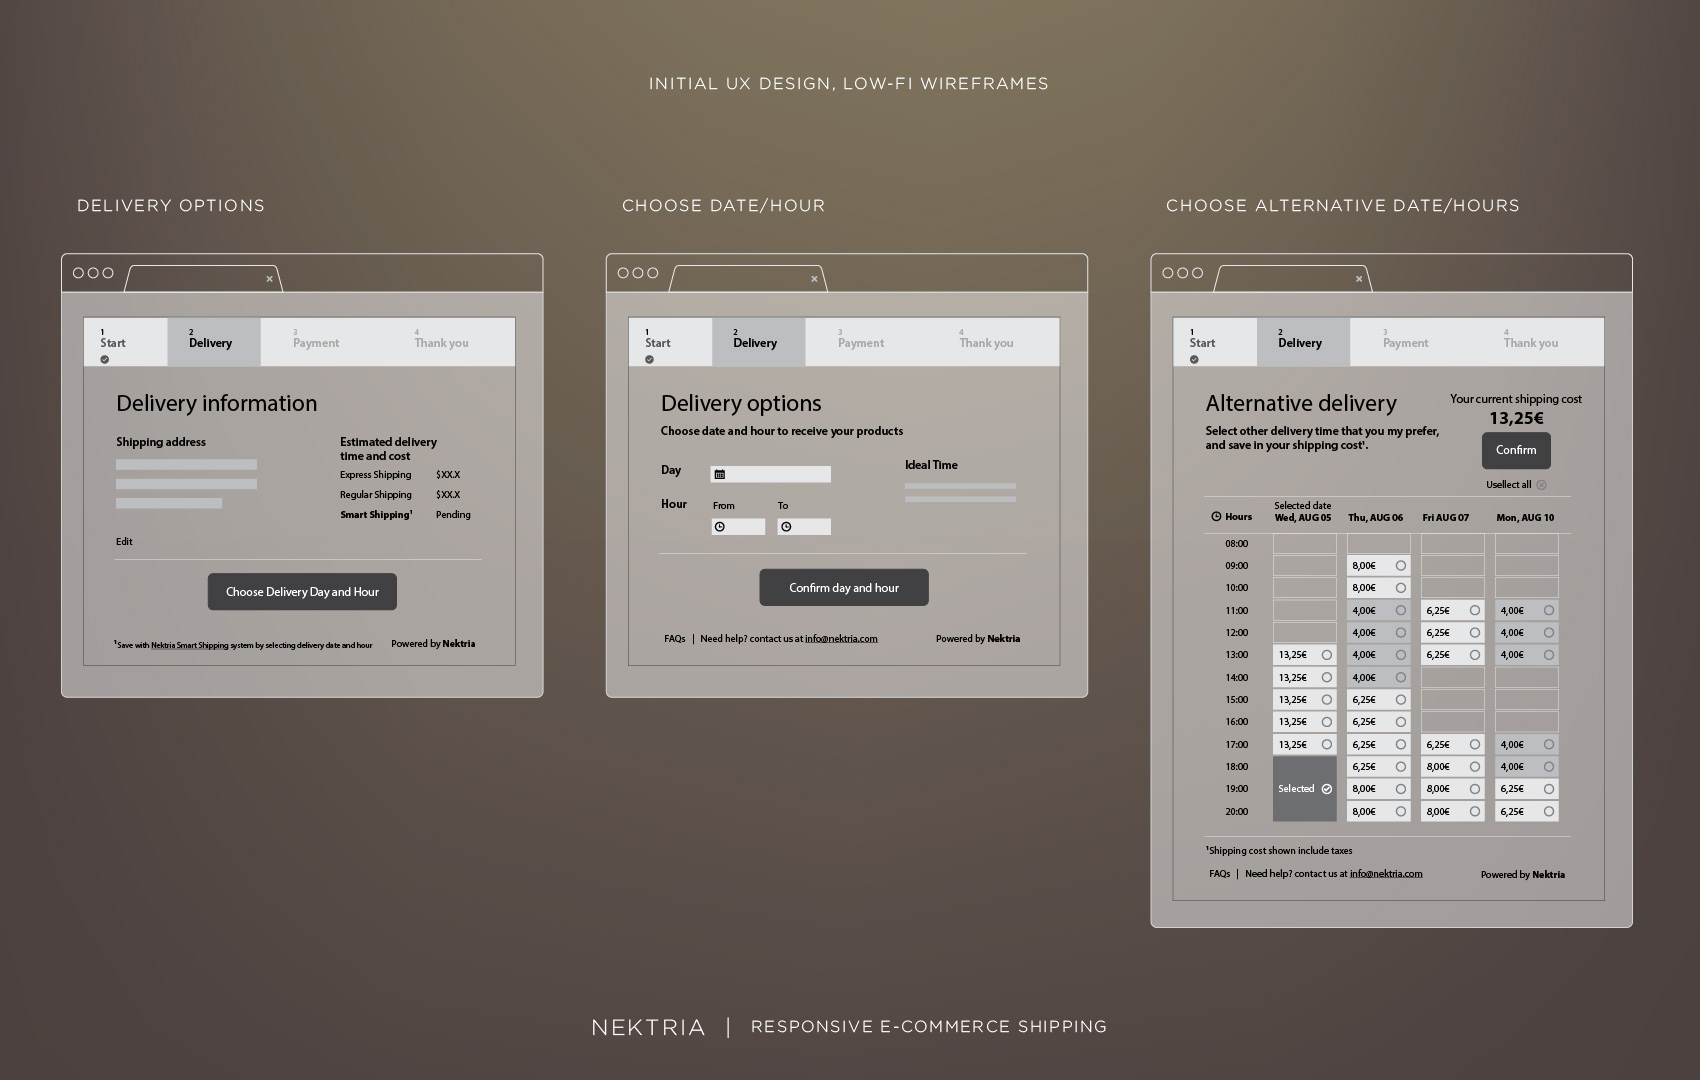 Low-Fi wireframes, initial UX design